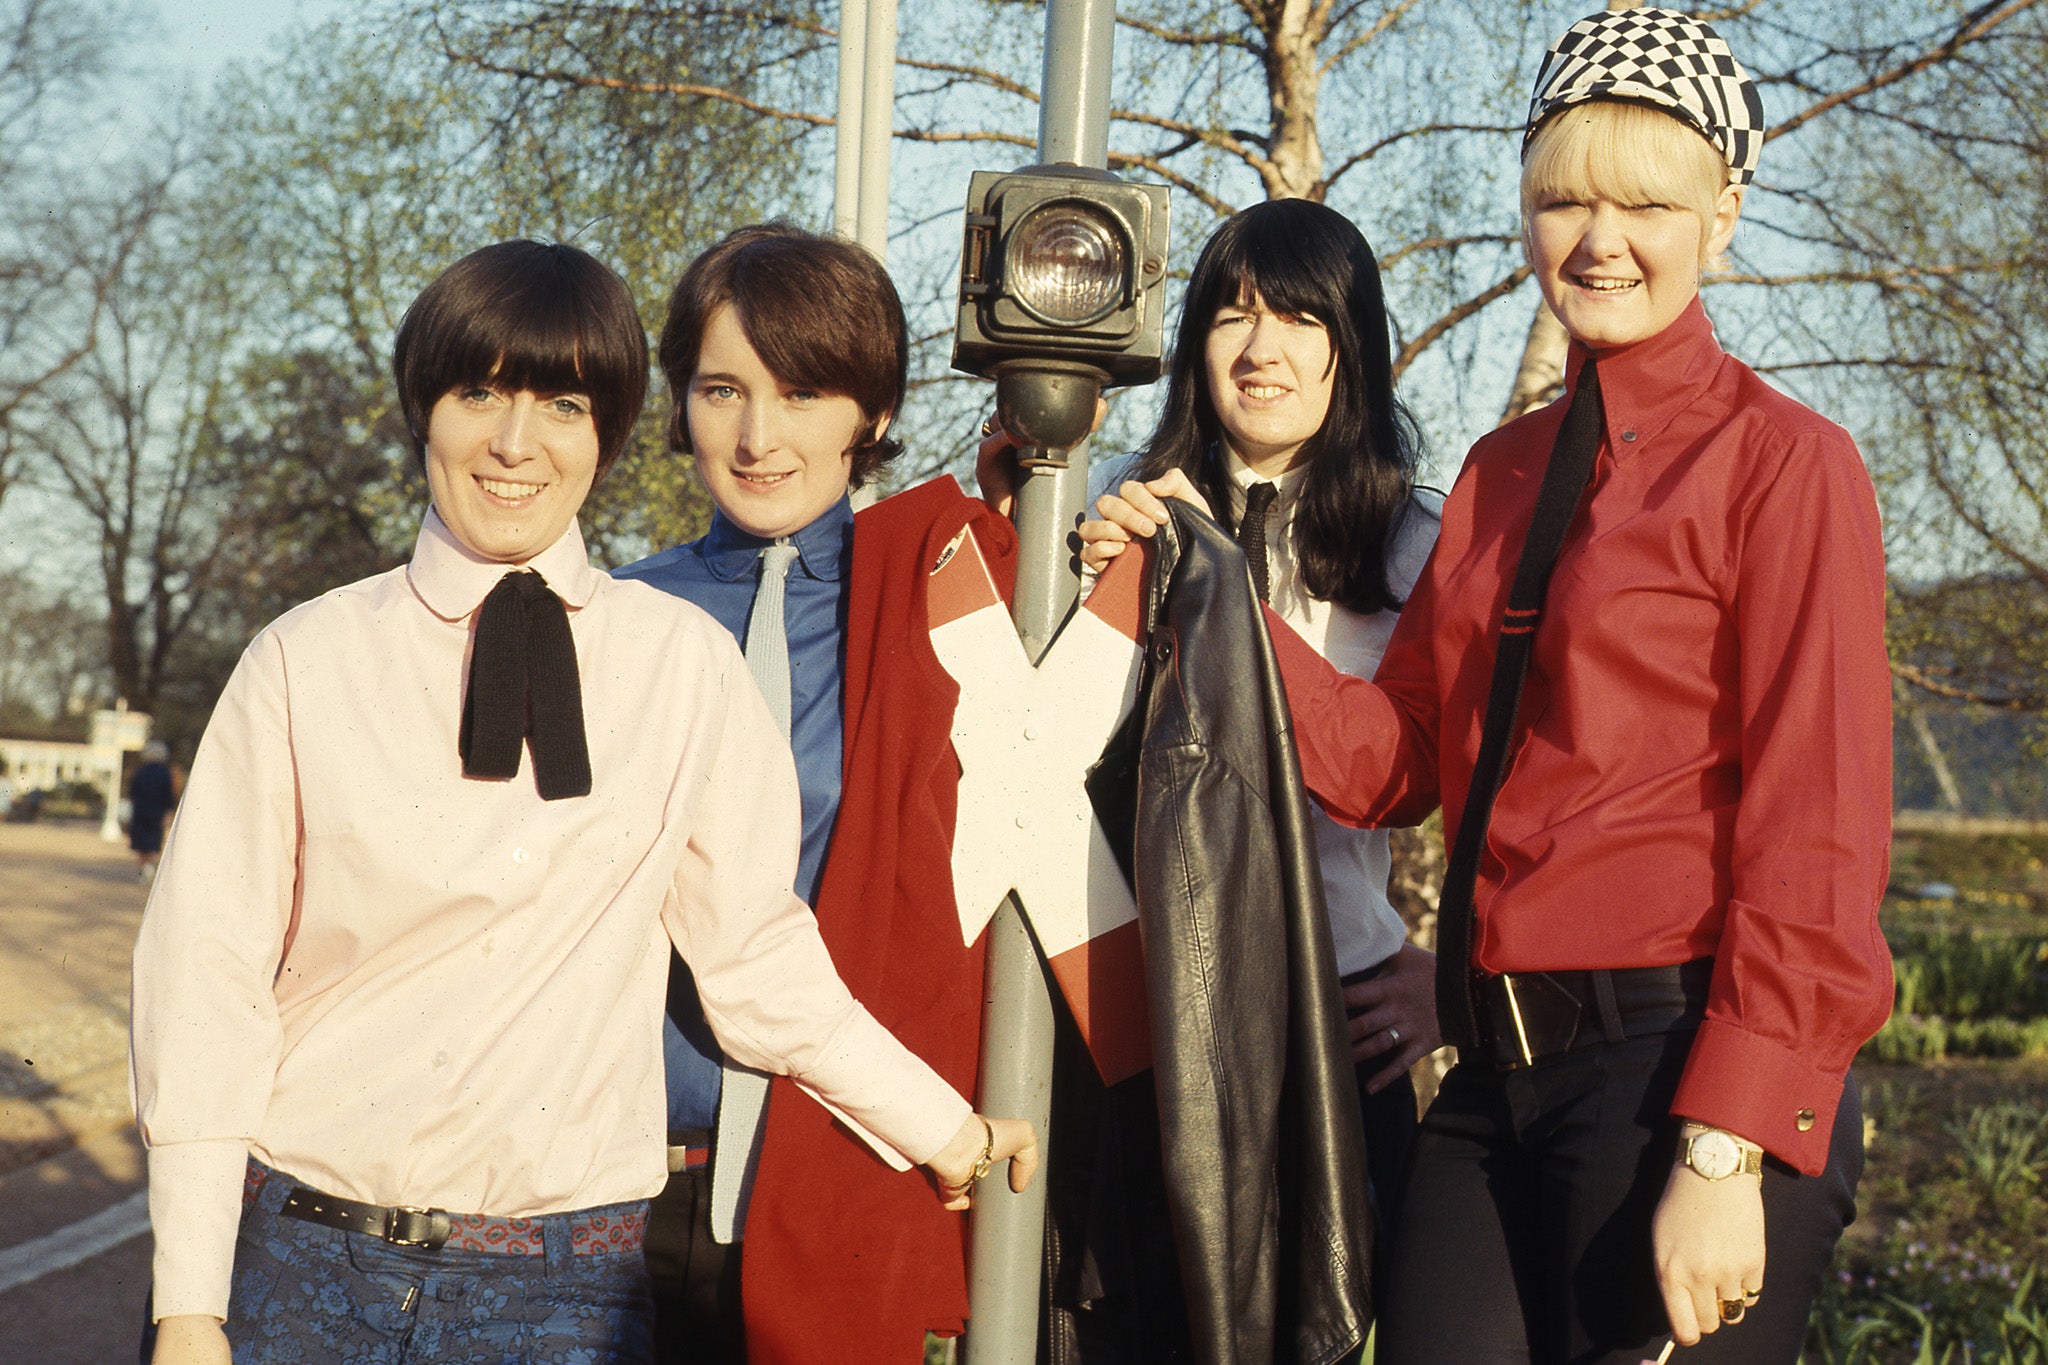 Formed in Liverpool in early 1962, The Liverbirds set the standard for all-female groups